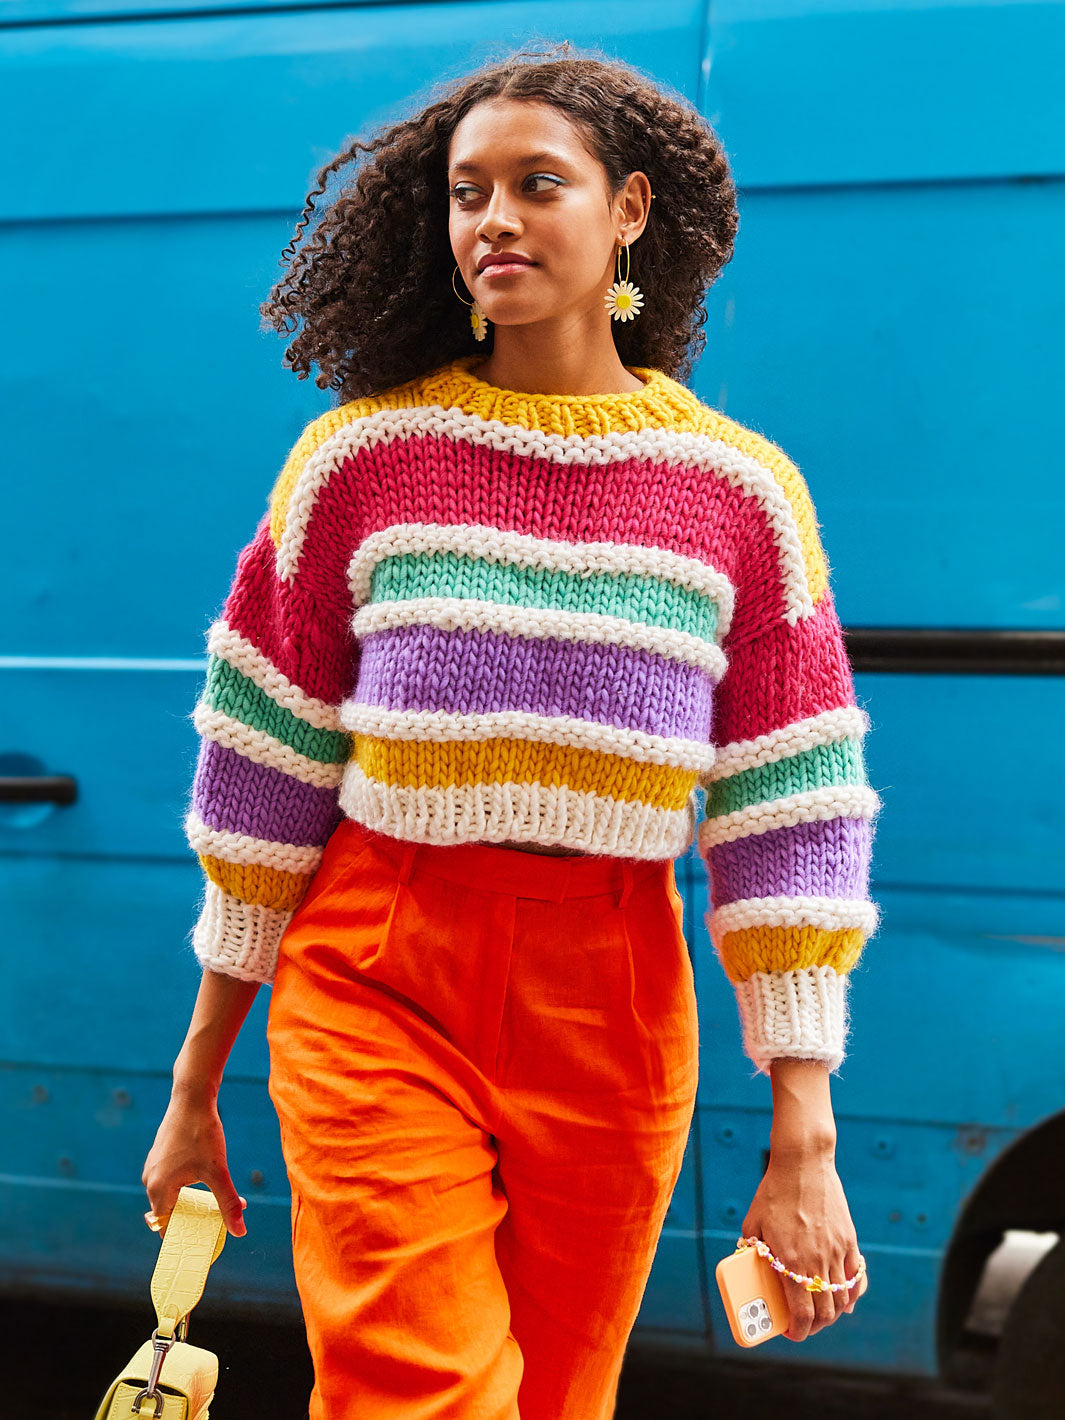 Woman walks away from blue van wearing bright orange pants and a colourful chunky knit jumper